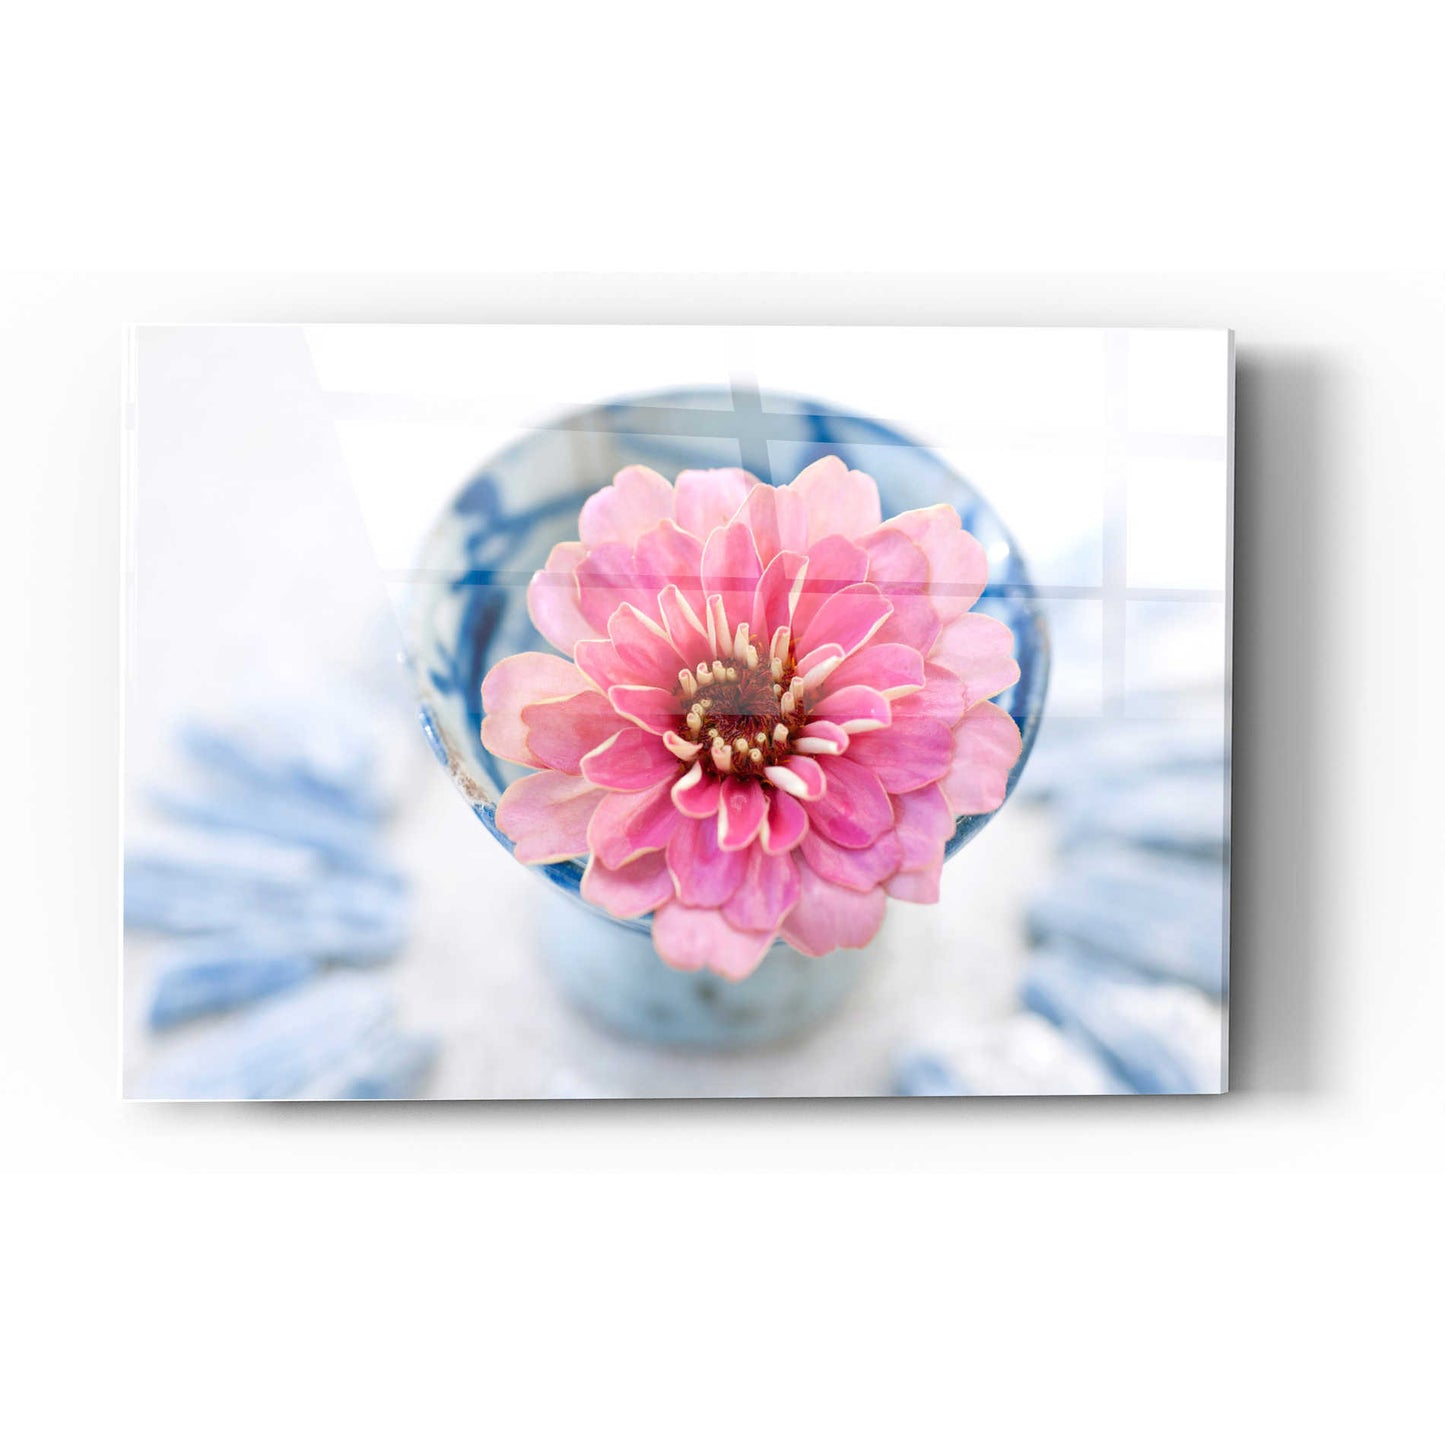 Epic Art 'Pink Flower in a Saké Cup' by Elena Ray Acrylic Glass Wall Art